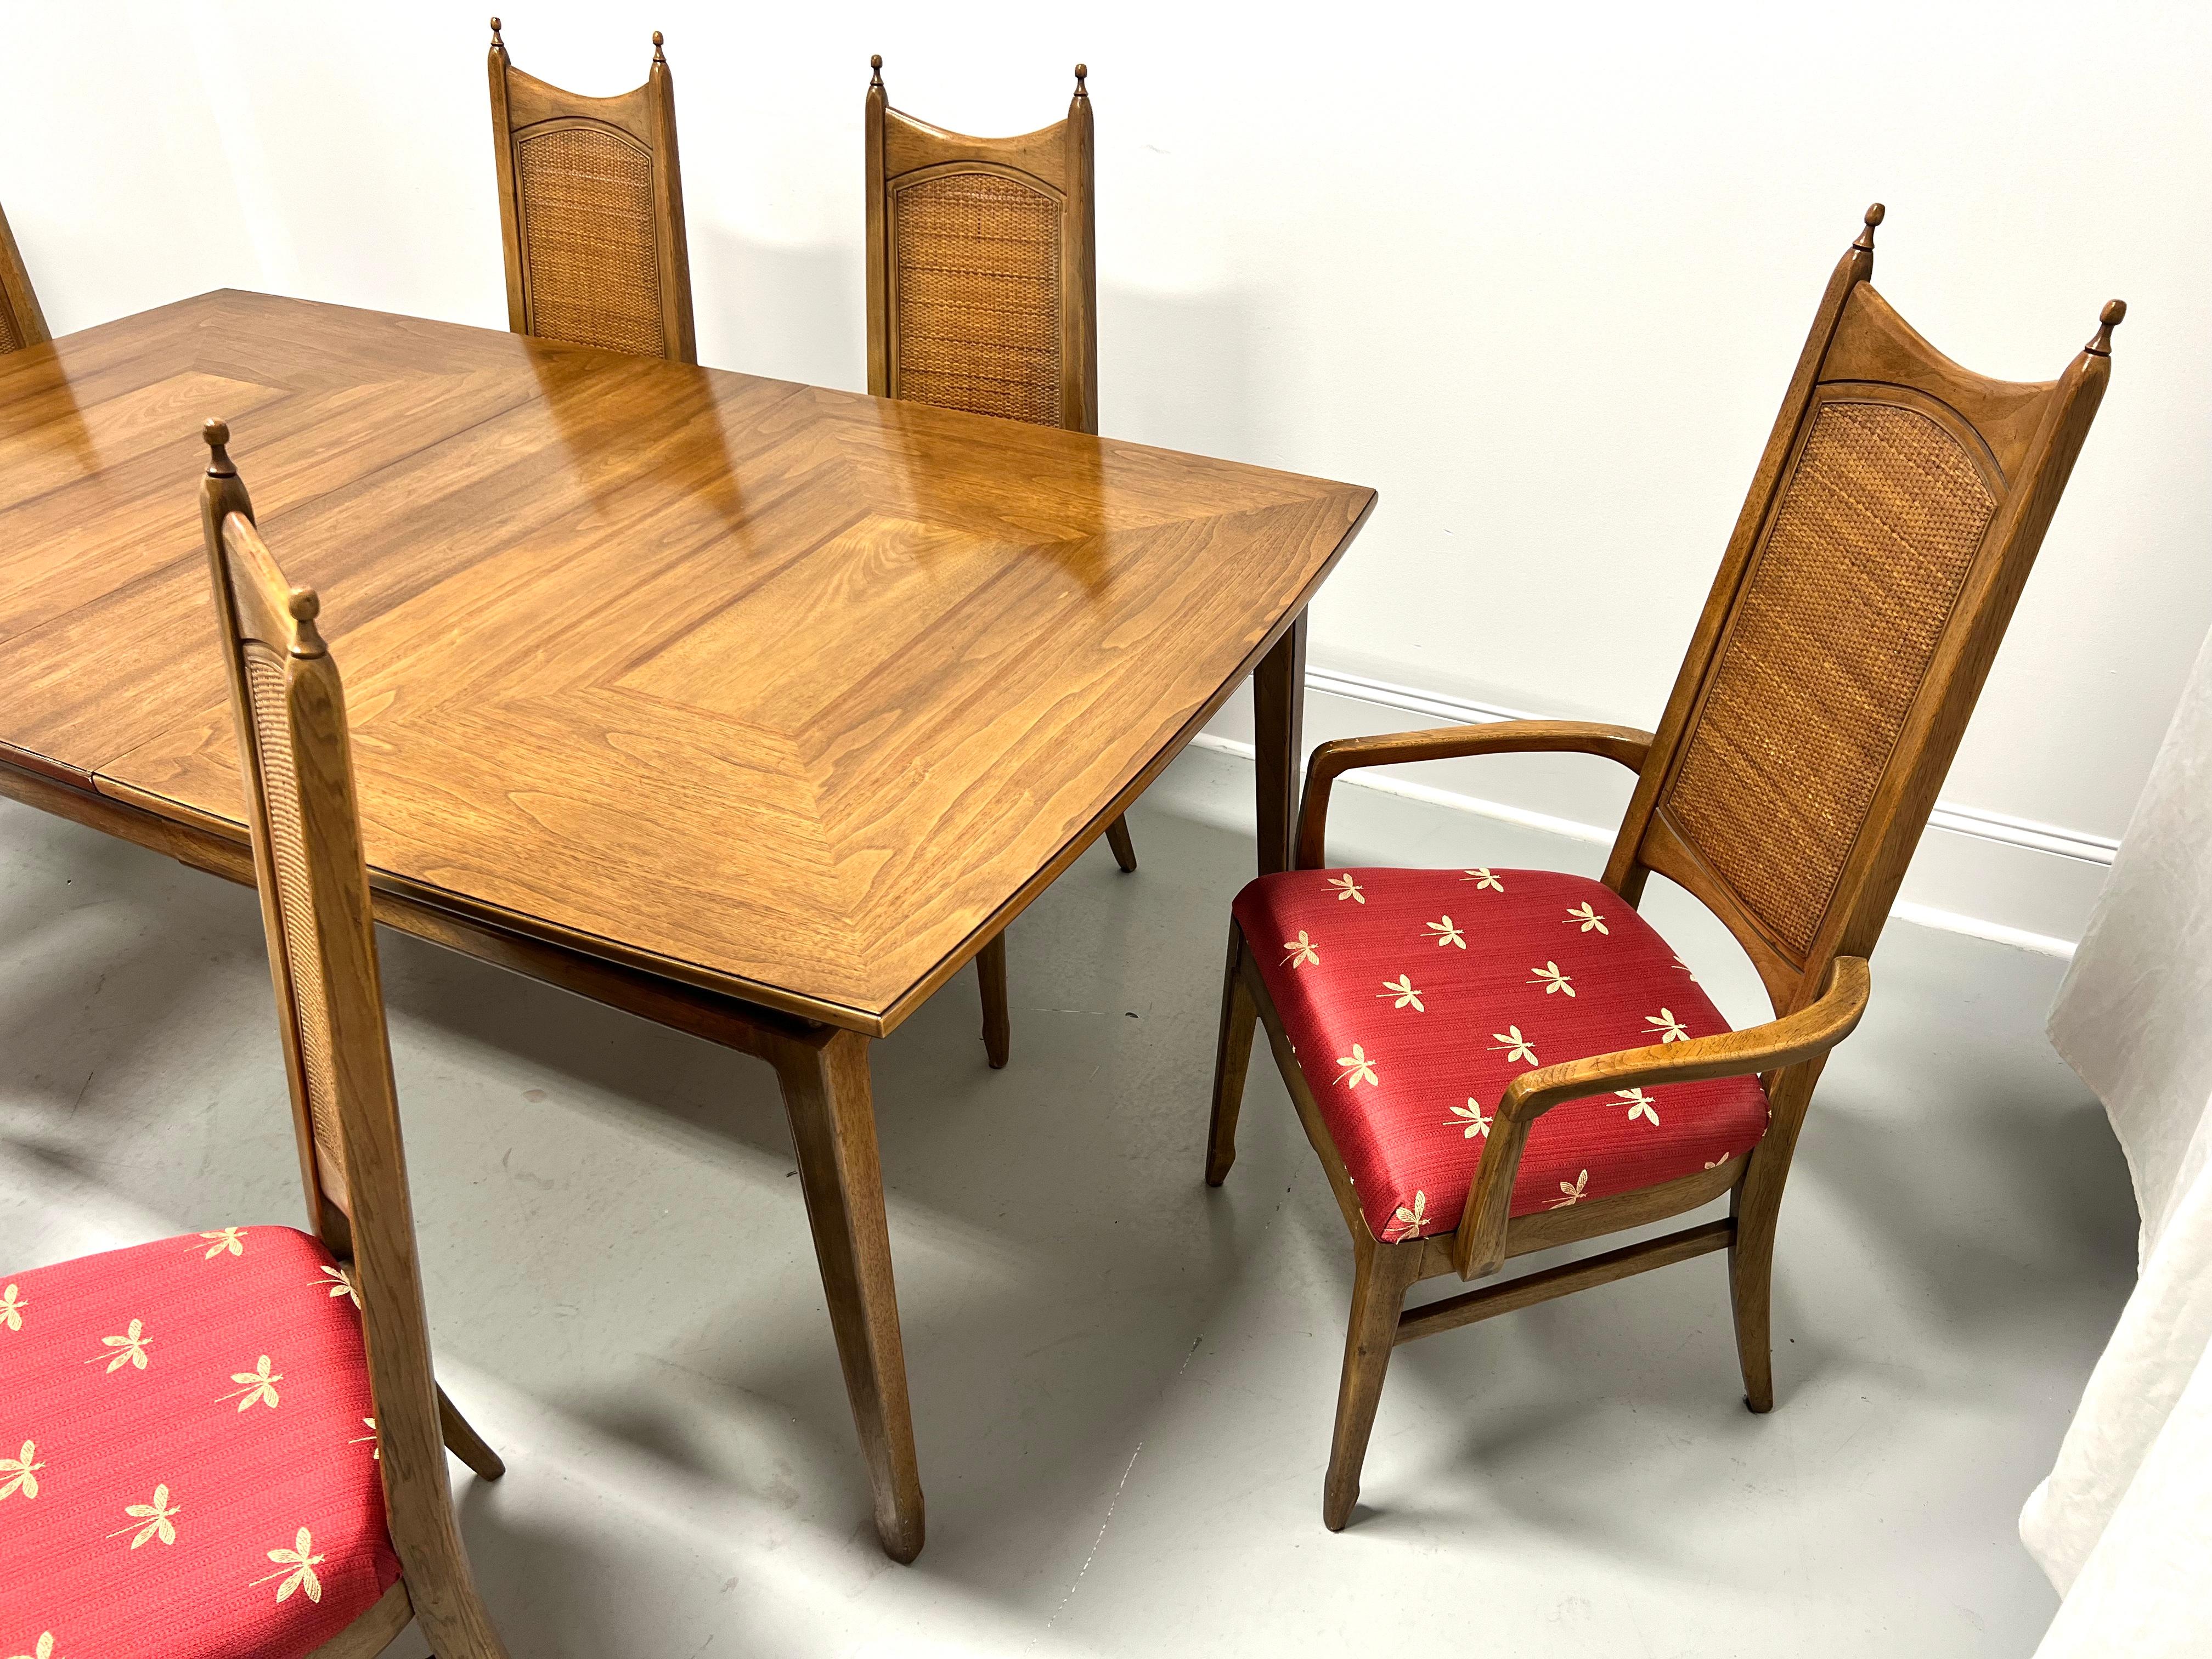 THOMASVILLE Pecan Mid 20th Century Modern MCM Dining Table Set with 6 Chairs In Good Condition For Sale In Charlotte, NC